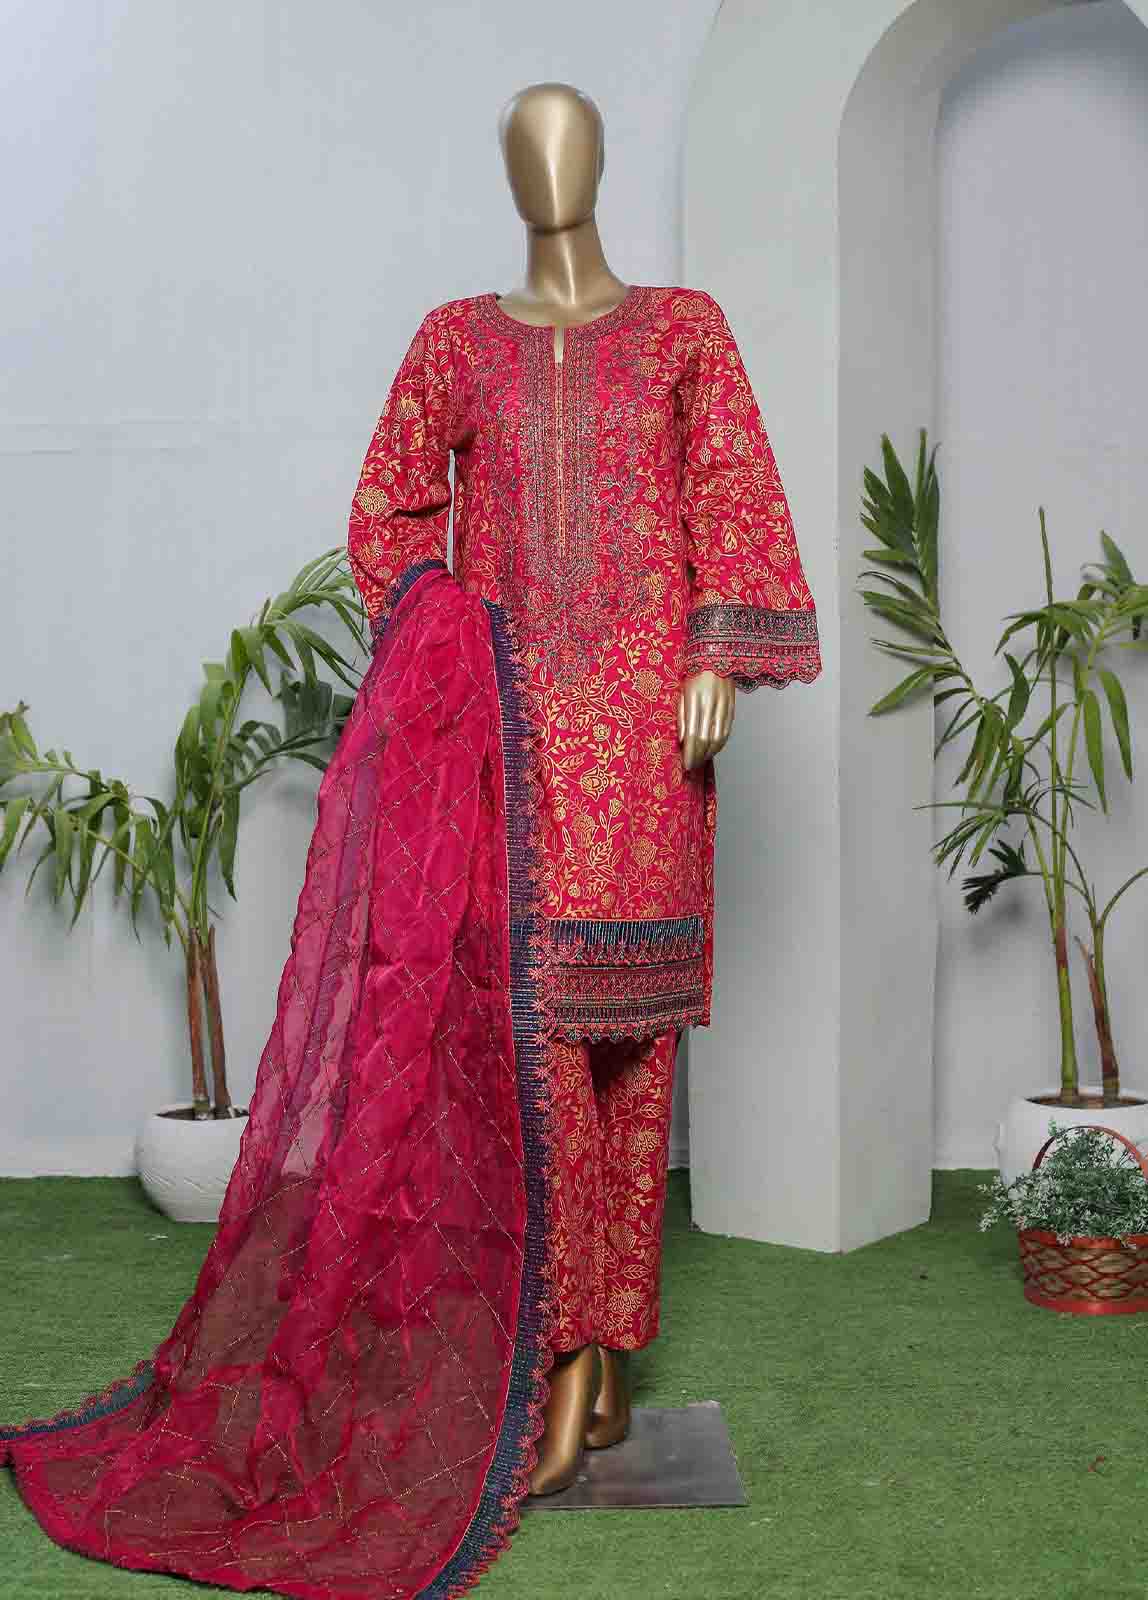 LRGE-0023- 3 Piece Block Printed Embroidered Suit